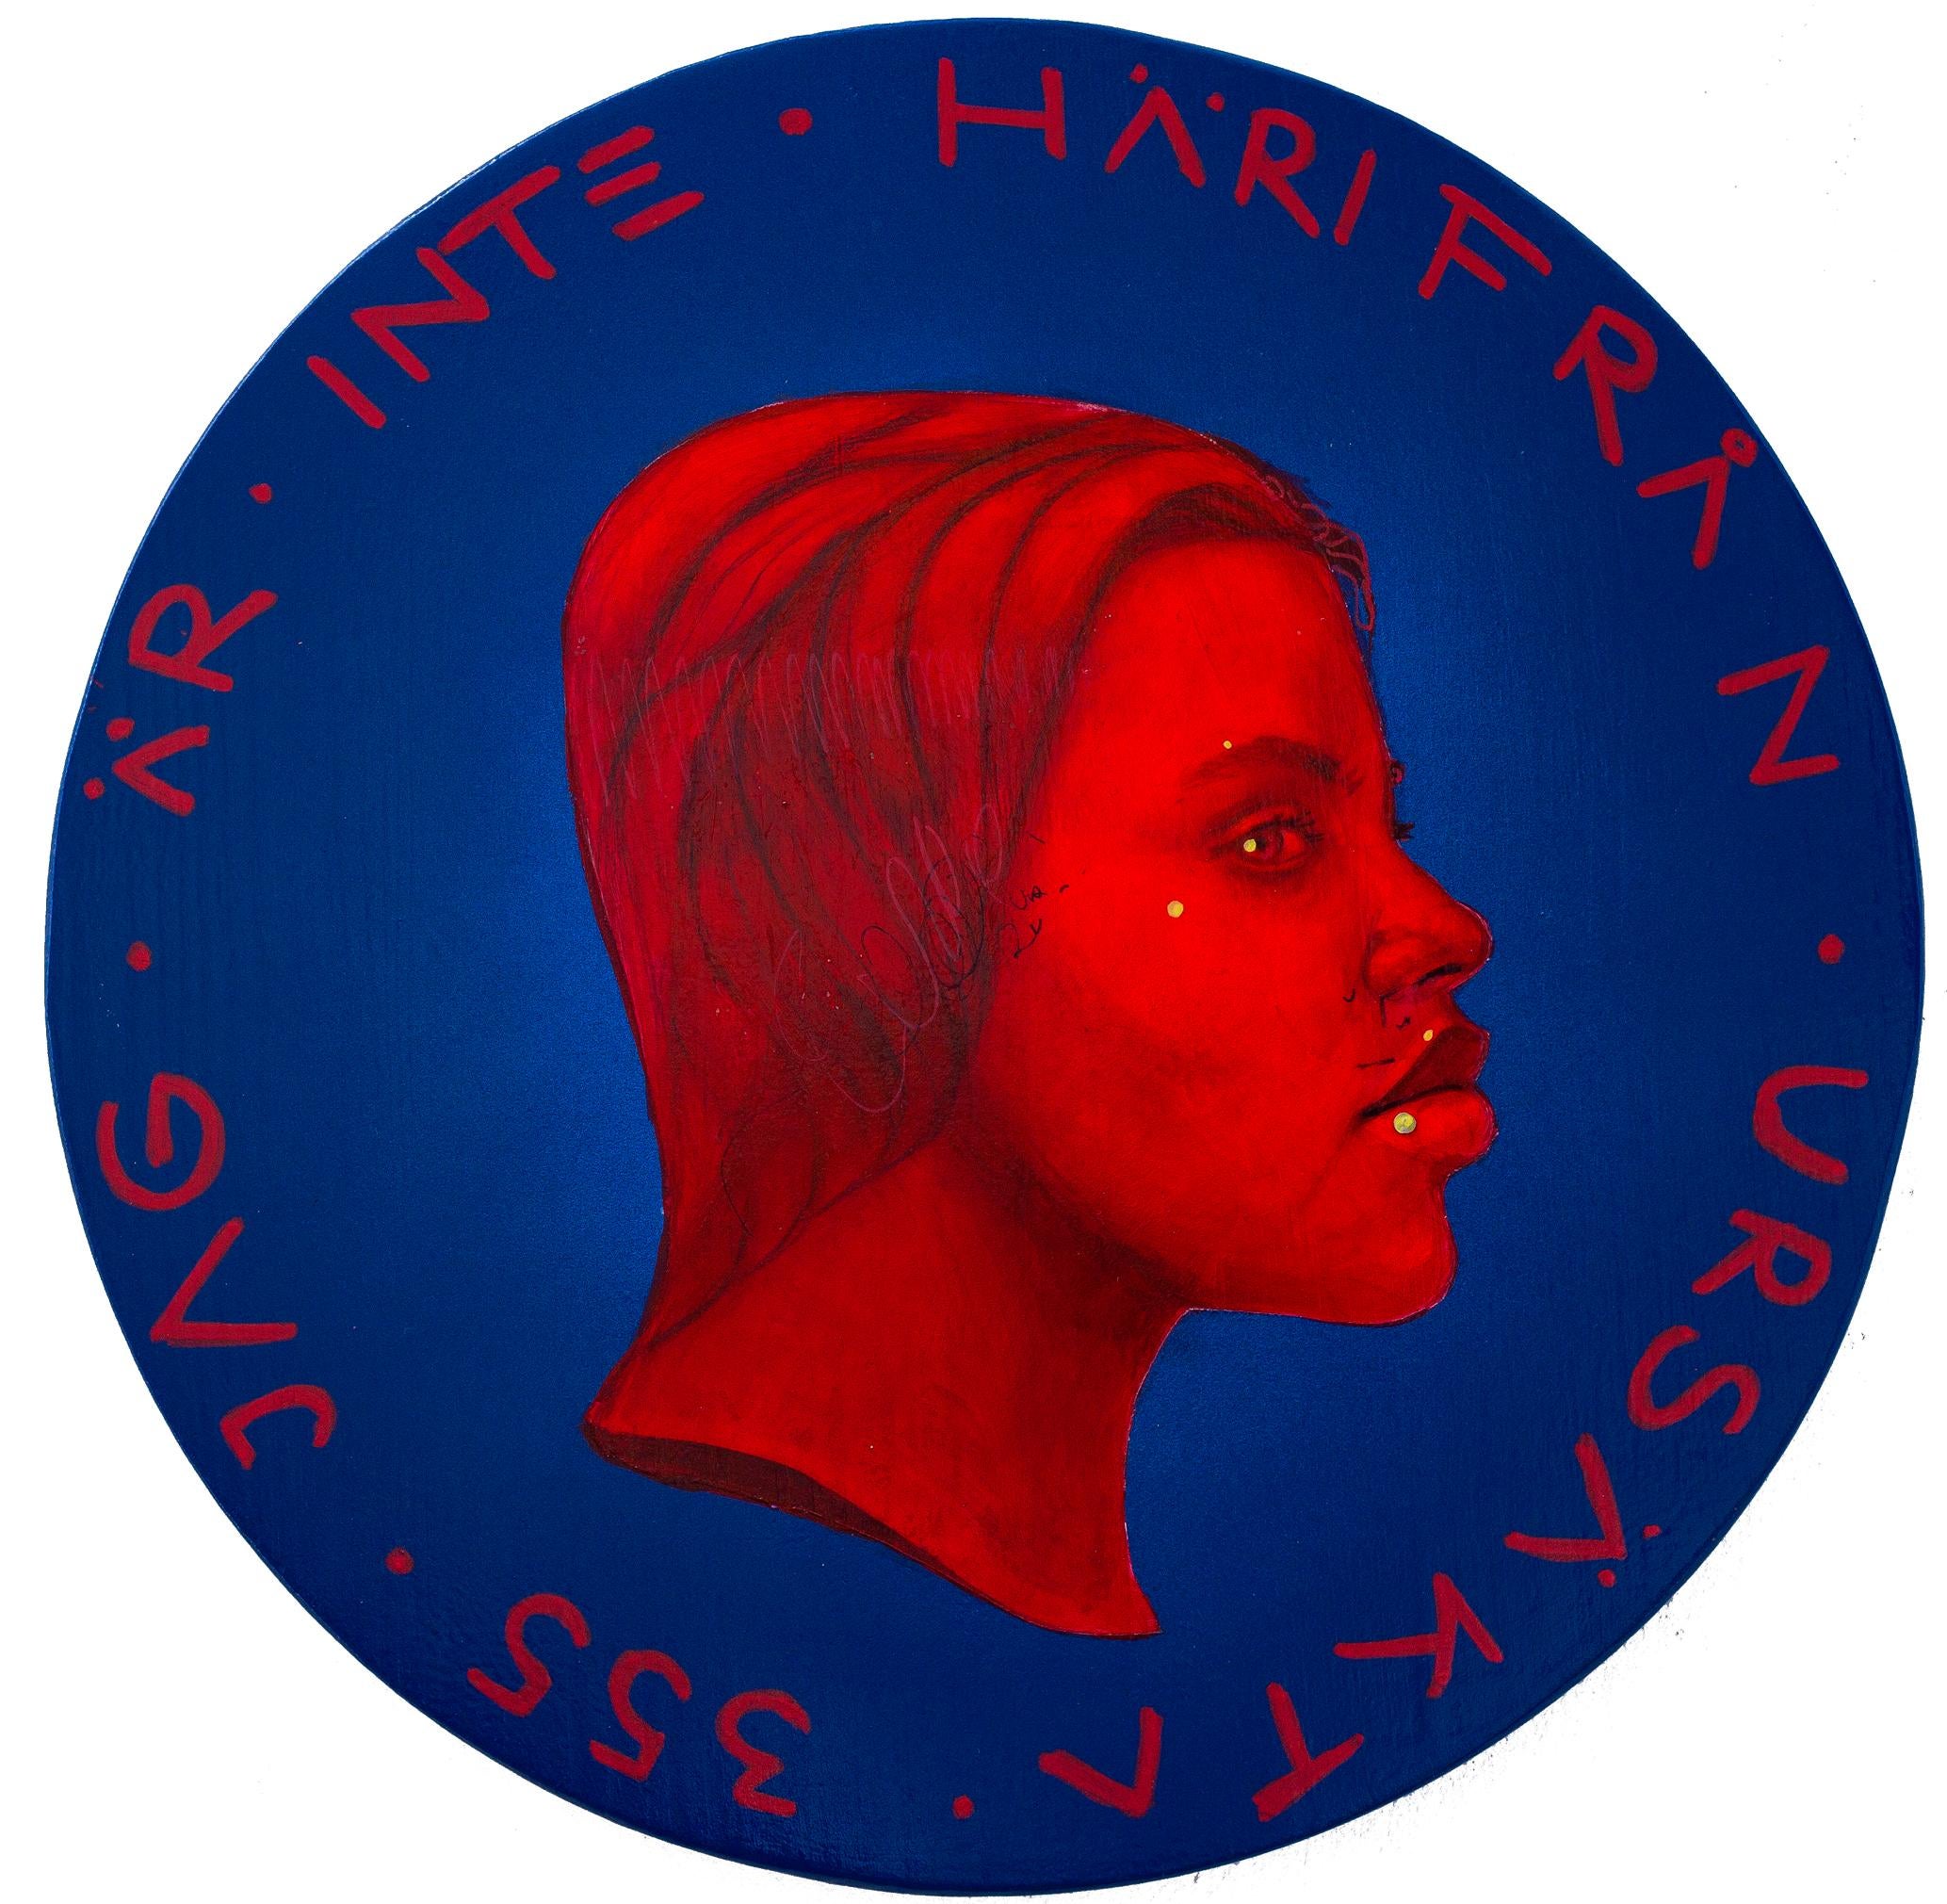 Contemporary Portrait Wooden Coin. Vibrant Red Fluor And Blue. "Currency #209" - Mixed Media Art by Natasha Lelenco